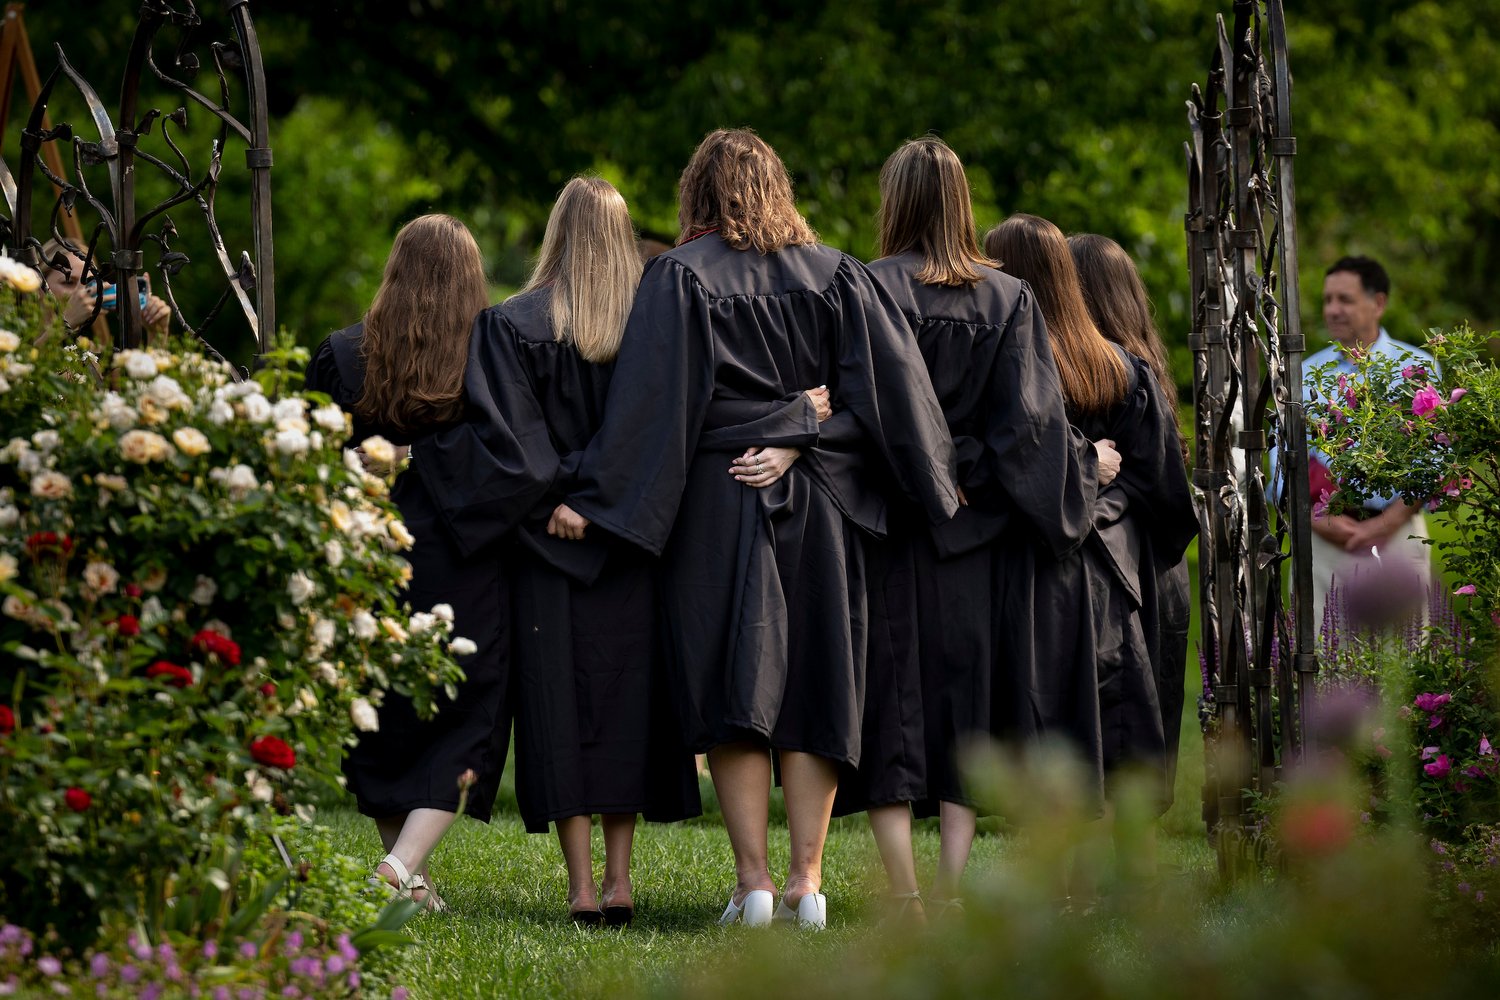 Several graduates pose in garden with backs turned to camera